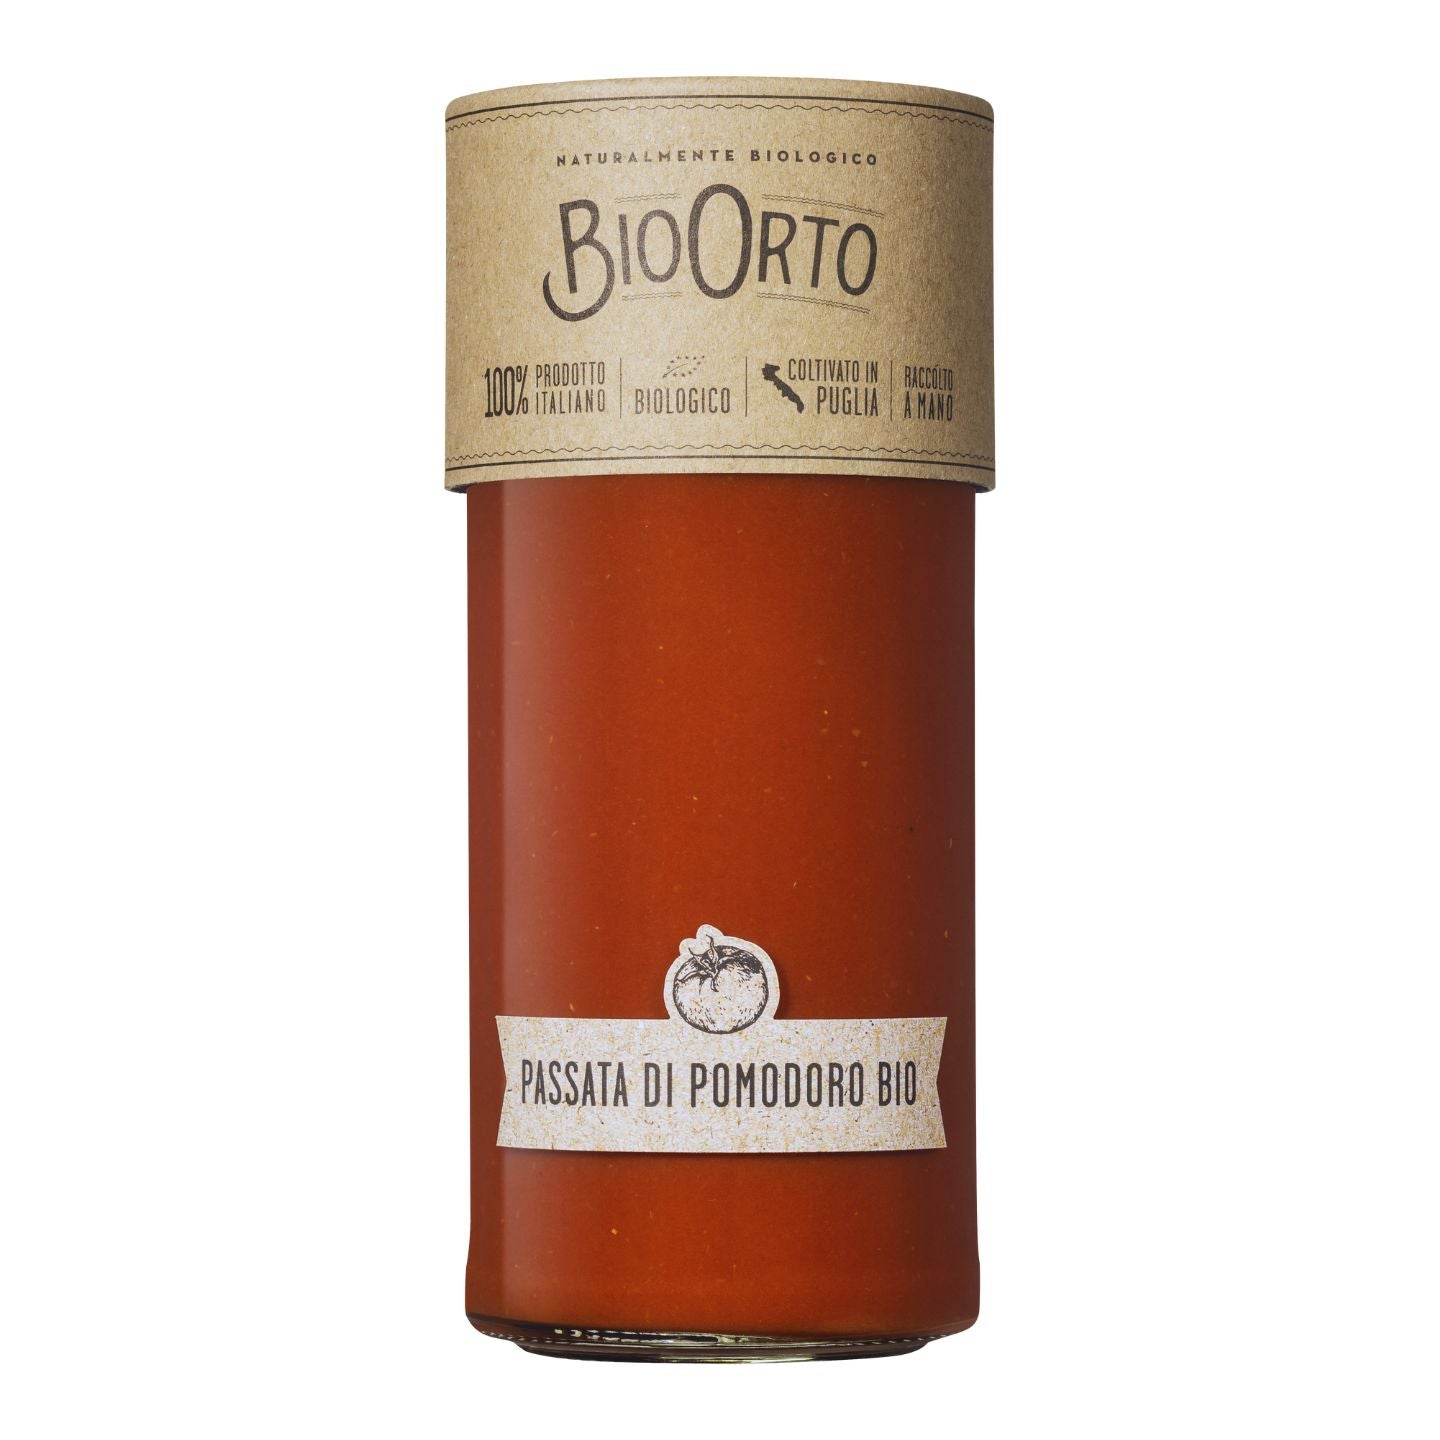 Bio Orto Organic Tomato Passata 580ml  | Imported and distributed in the UK by Just Gourmet Foods